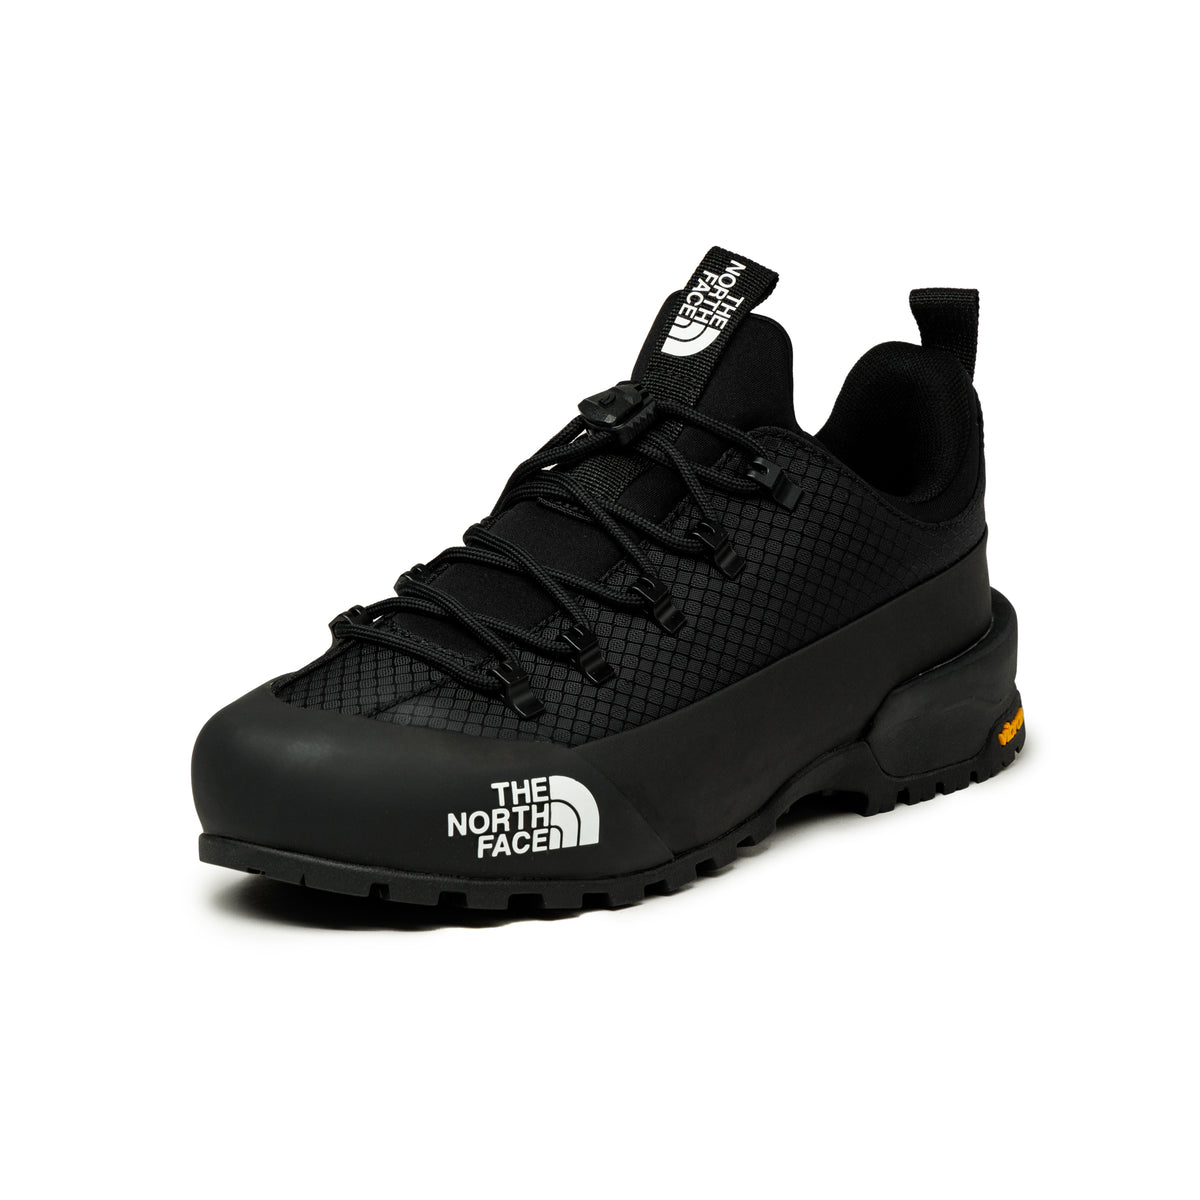 The North Face Glenclyffe Low » Buy online now!